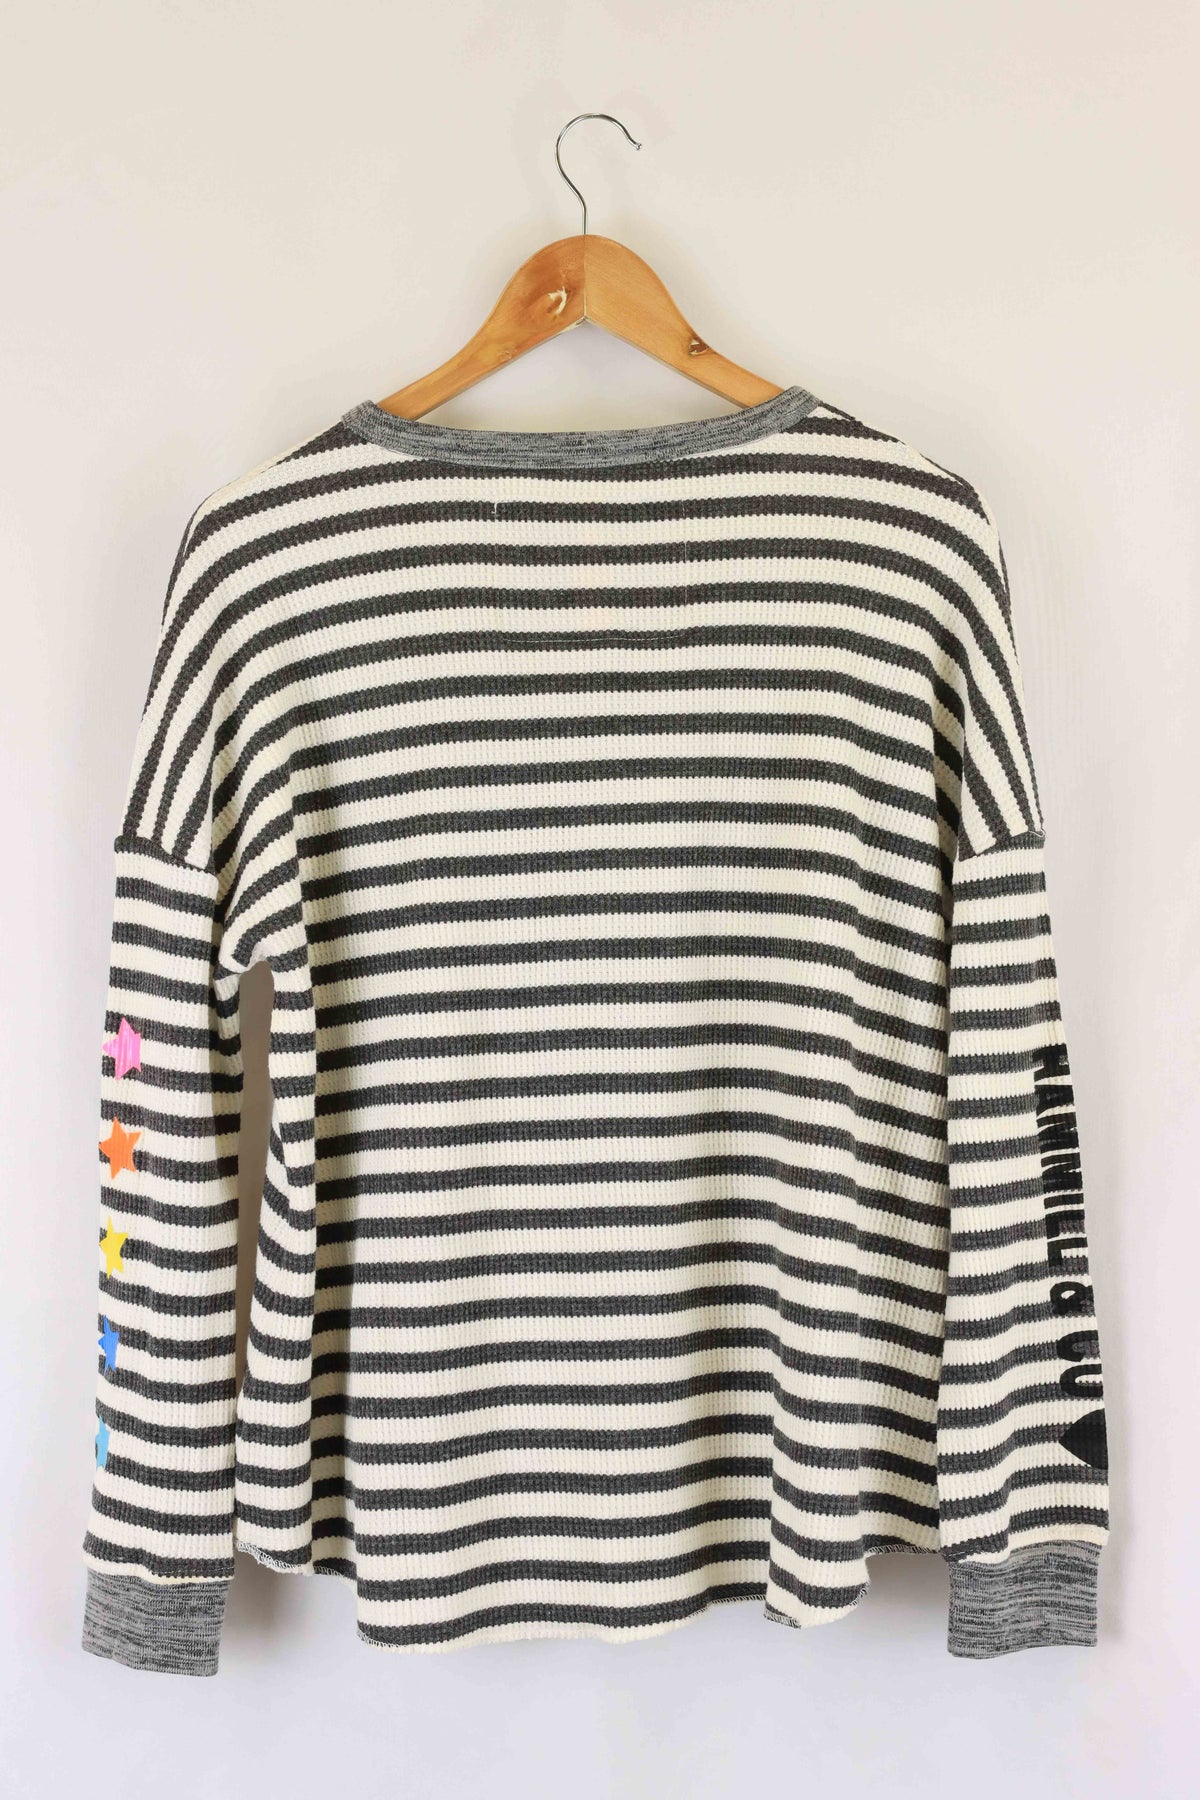 Hammill &amp; co Black And White Jumper Top S